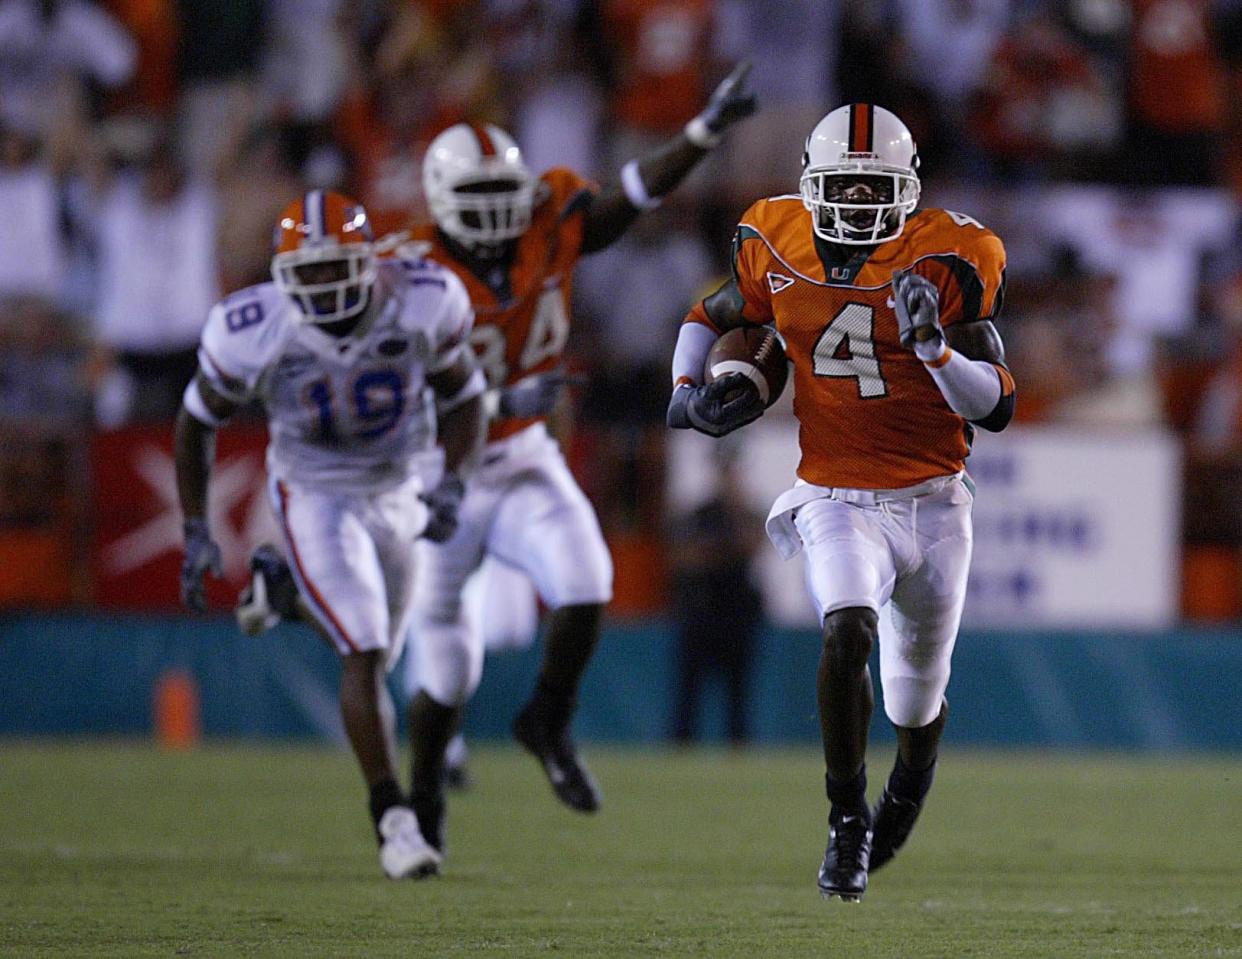 Miami Hurricanes returner Devin Hester races the length of the field for touchdown on the opening kickoff of the game against Florida in 2003.